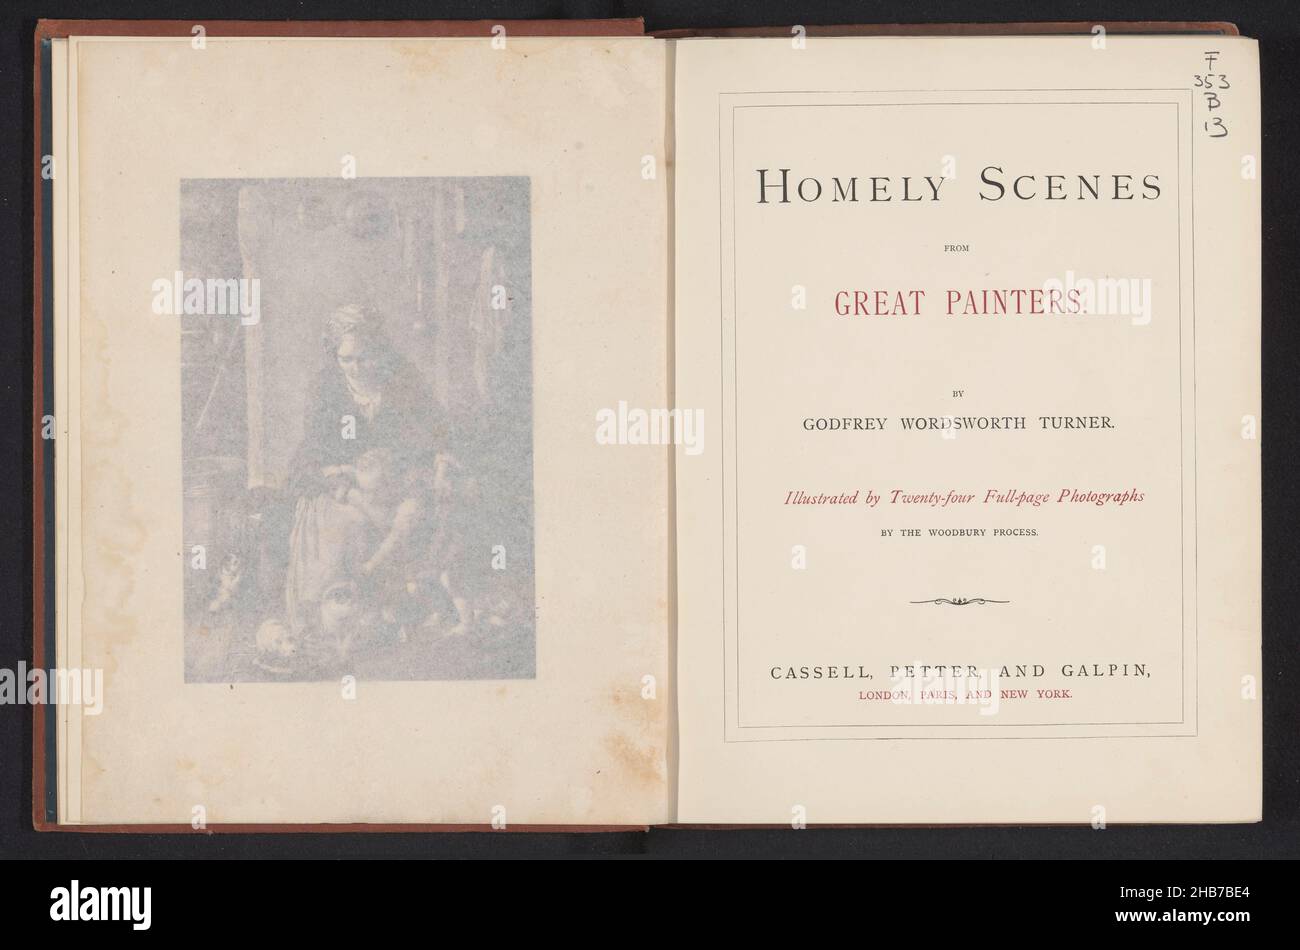 Homely scenes from great painters (title on object), Godfrey Wordsworth Turner (mentioned on object), publisher: Petter & Galpin Cassell (mentioned on object), London, 1871, paper, cardboard, printing, height 285 mm × width 225 mm × thickness 32 mm Stock Photo